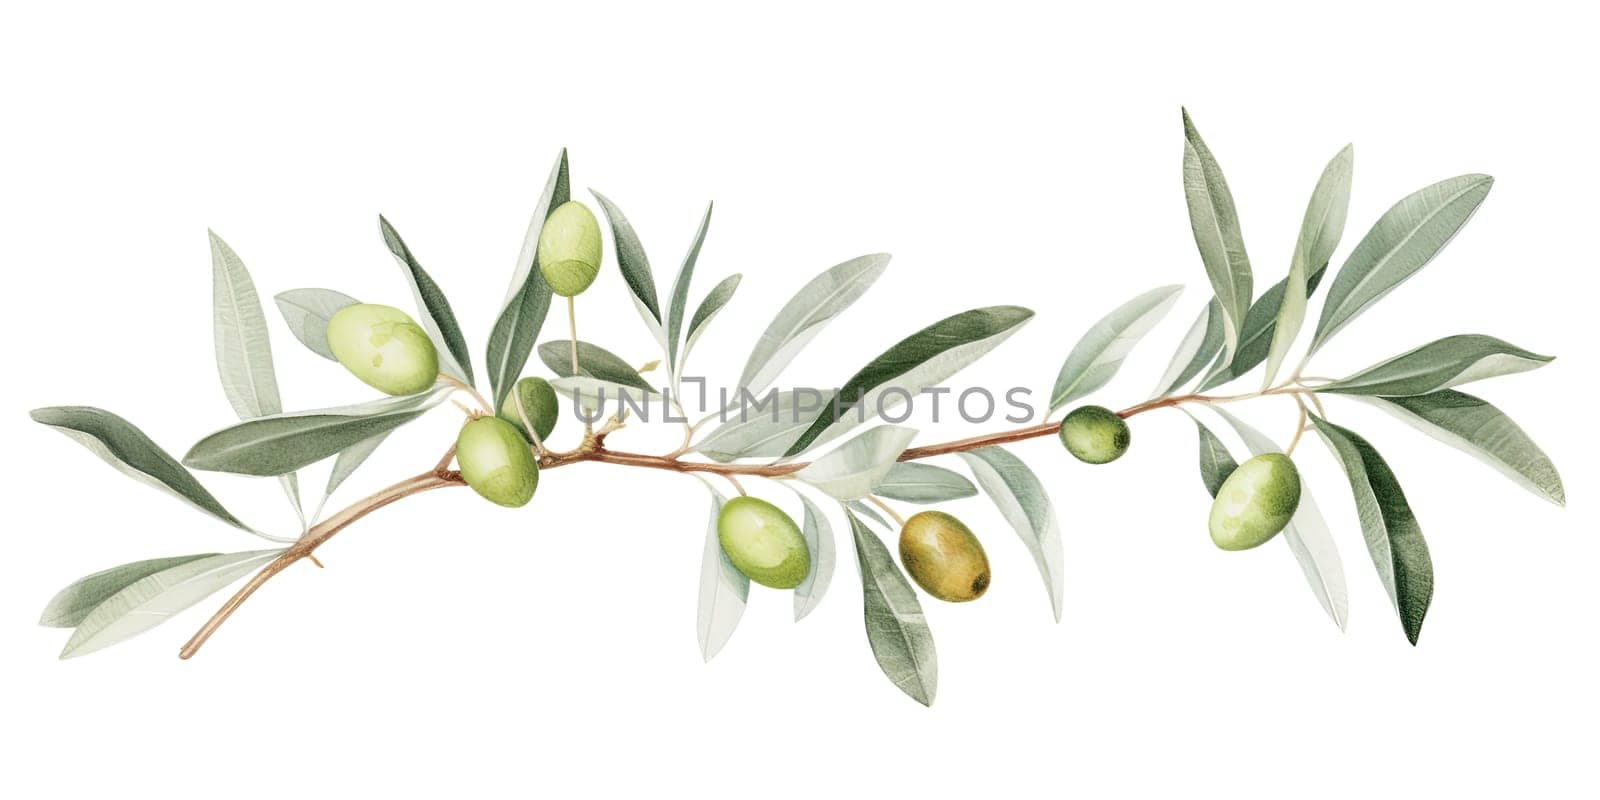 Watercolor Illustration Of Green Olive Leaves On A White Background by GekaSkr